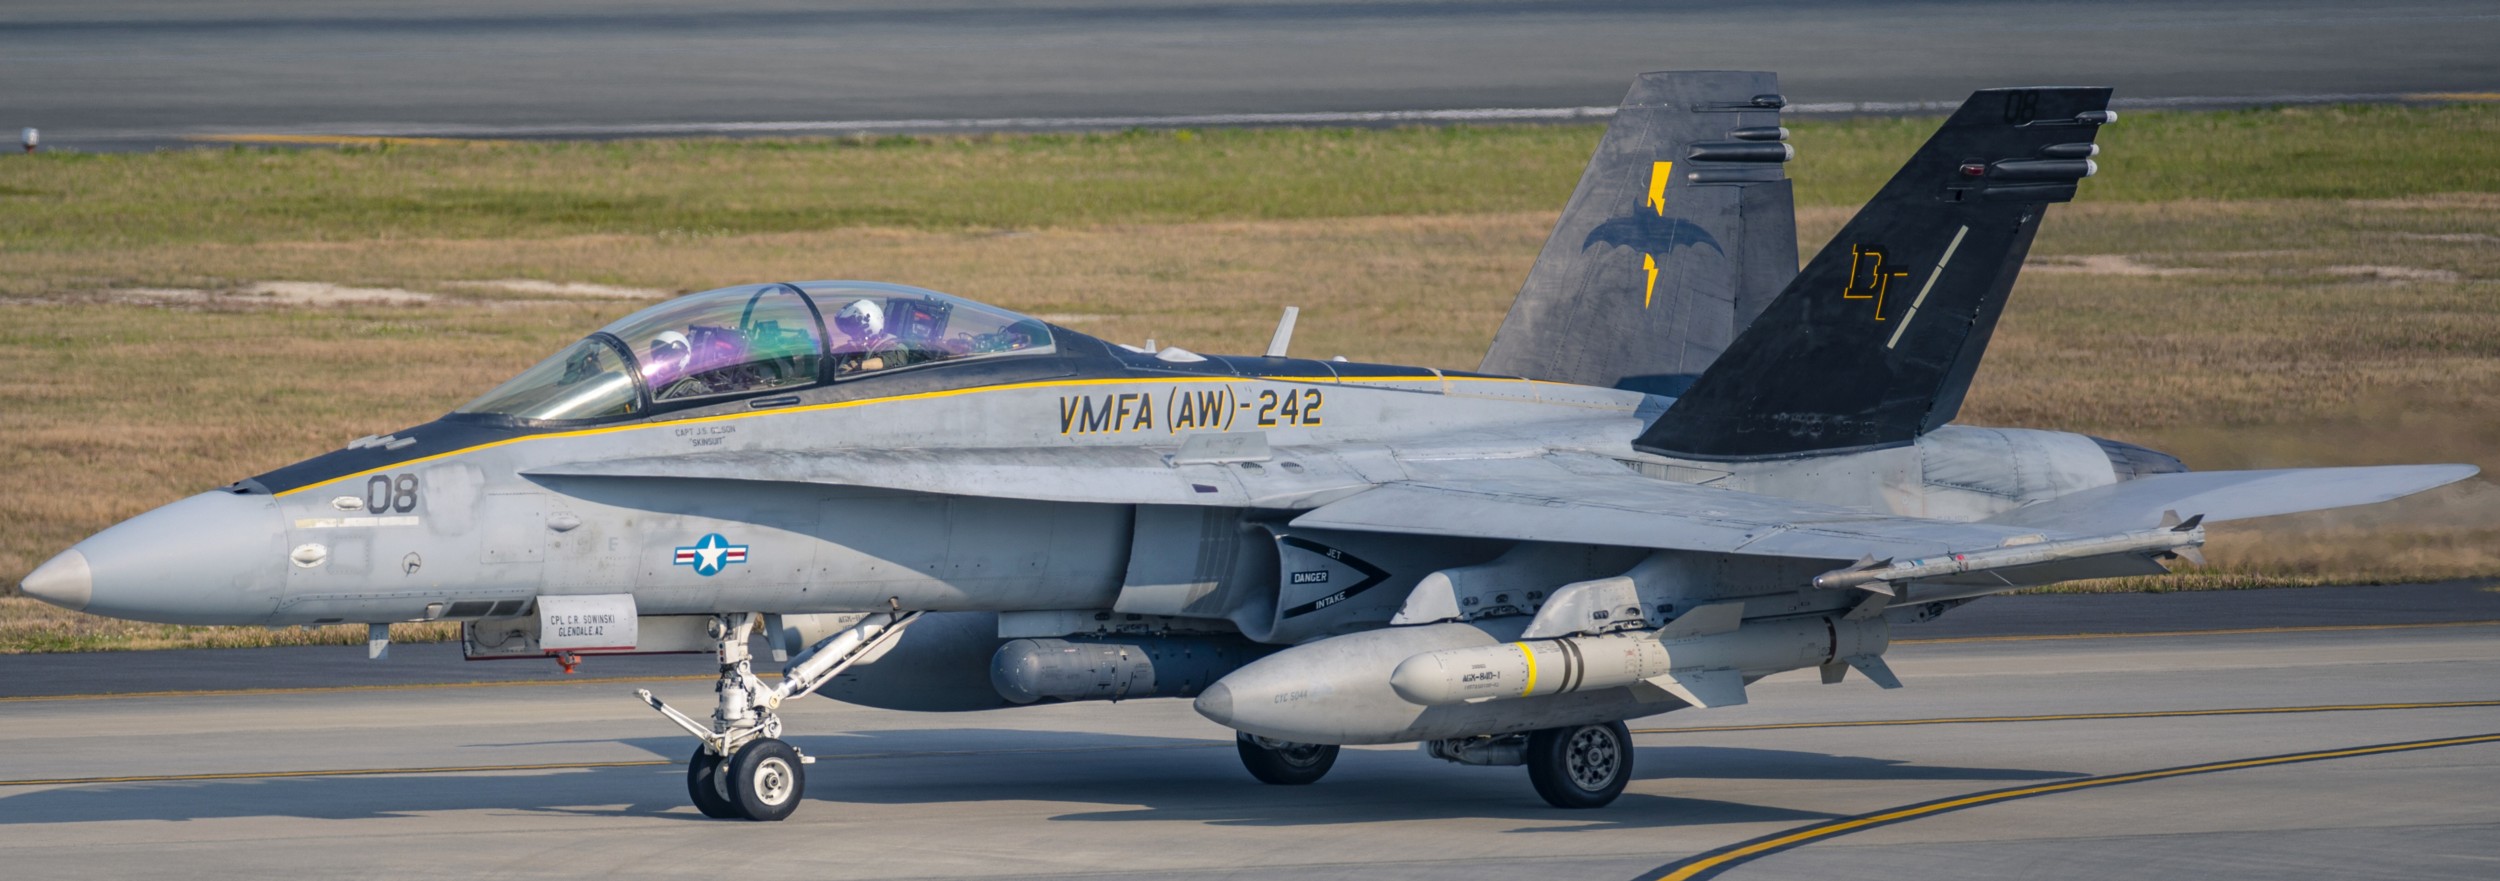 vmfa(aw)-242 bats marine all-weather fighter attack squadron usmc f/a-18d hornet 114 mcas iwakuni